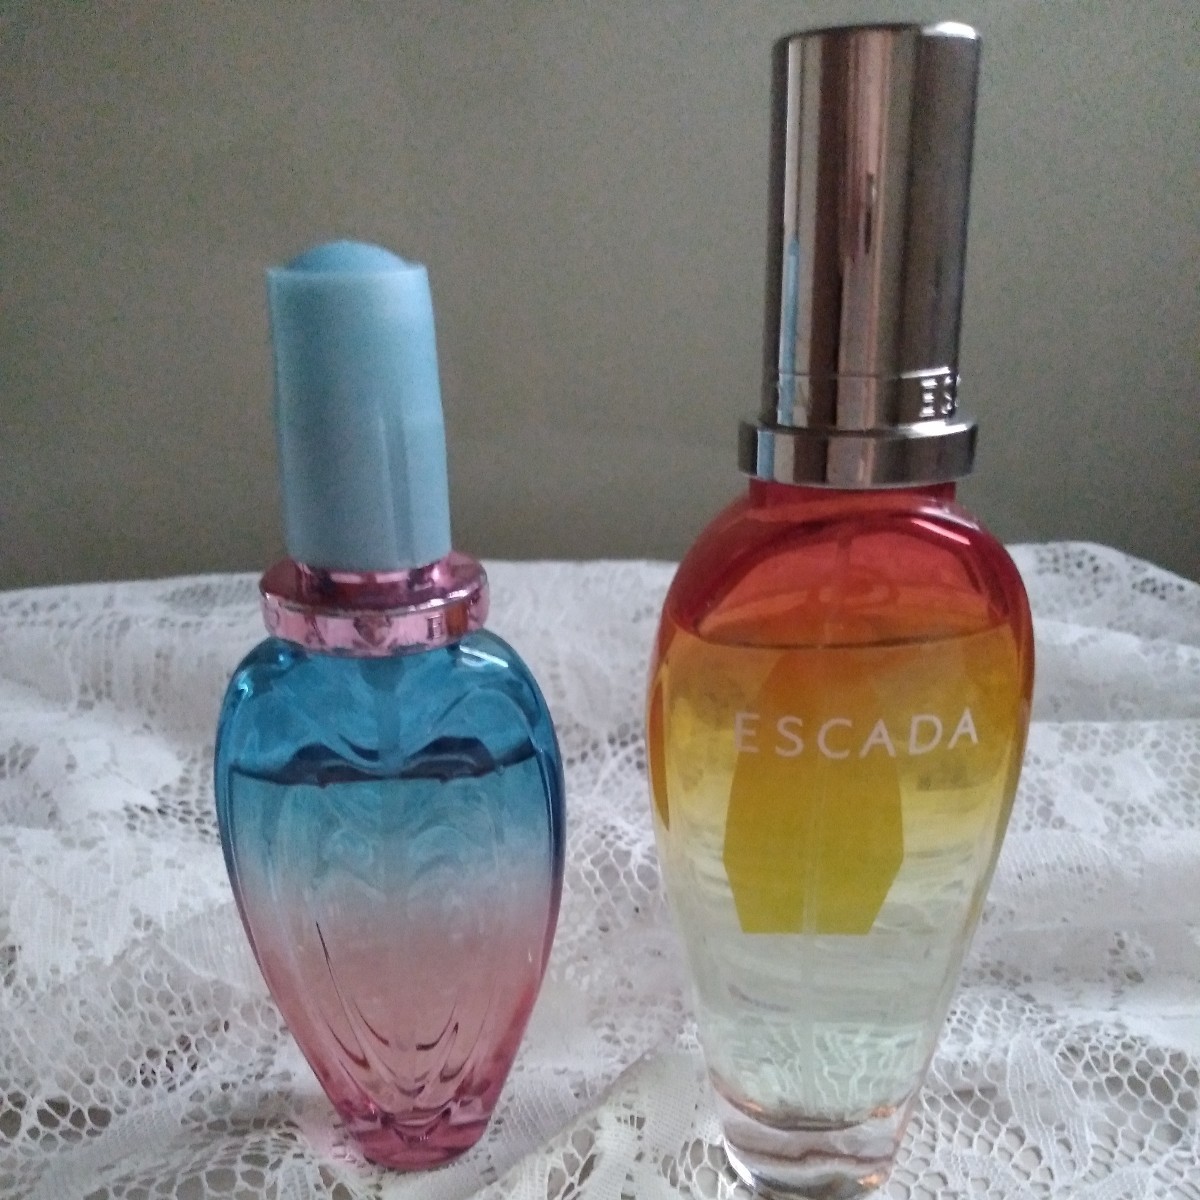 ESCADA Escada Islay n when so-doto crack 30 millimeter large bottle is write not therefore unknown two book@ together super-discount 